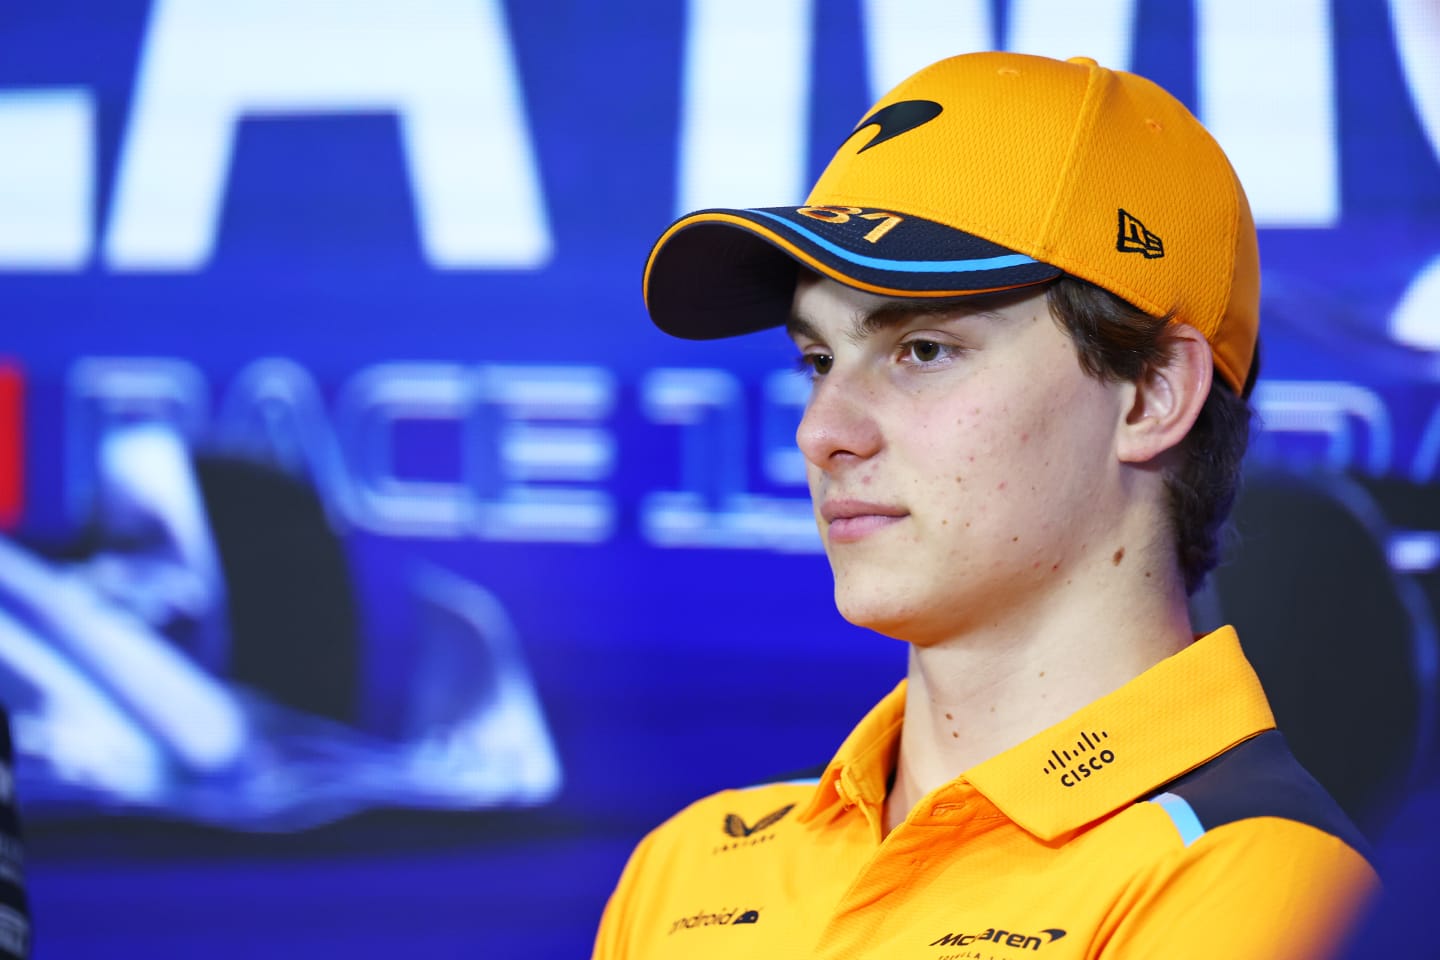 MONZA, ITALY - AUGUST 31: Oscar Piastri of Australia and McLaren attends the Drivers Press Conference during previews ahead of the F1 Grand Prix of Italy at Autodromo Nazionale Monza on August 31, 2023 in Monza, Italy. (Photo by Bryn Lennon - Formula 1/Formula 1 via Getty Images)